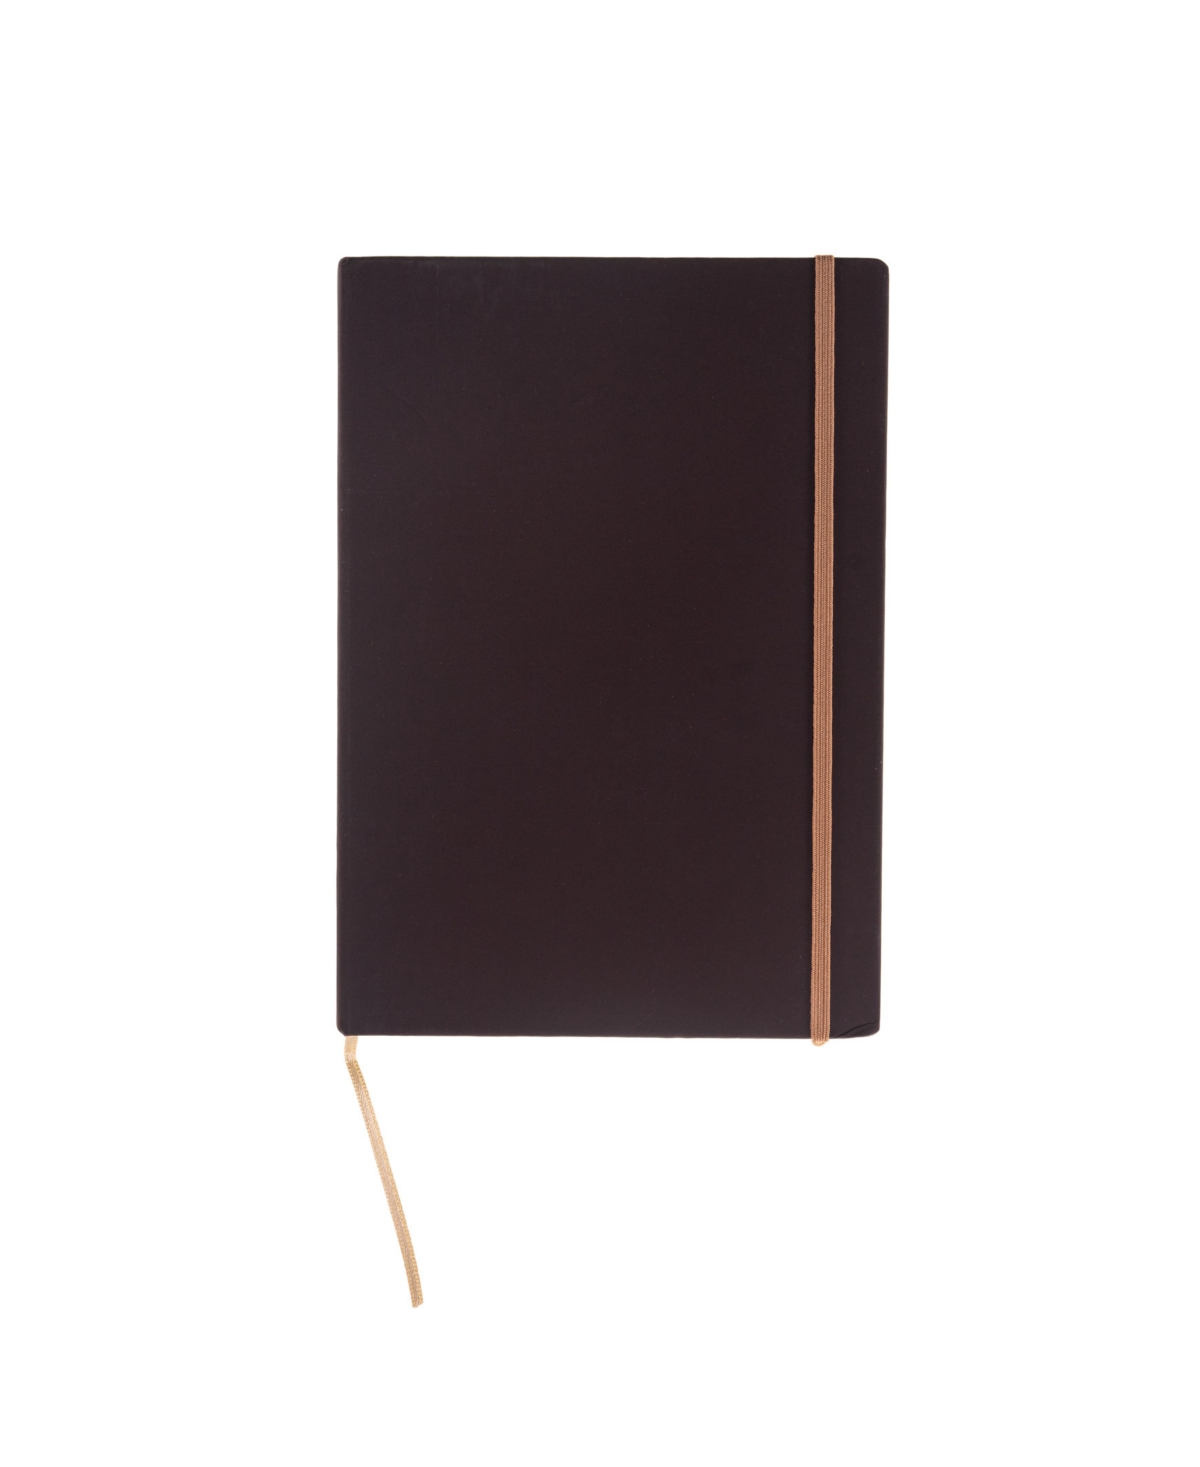 Ispira Hard Cover Dotted A5 Notebook, 5.8" x 8.3" - Brown